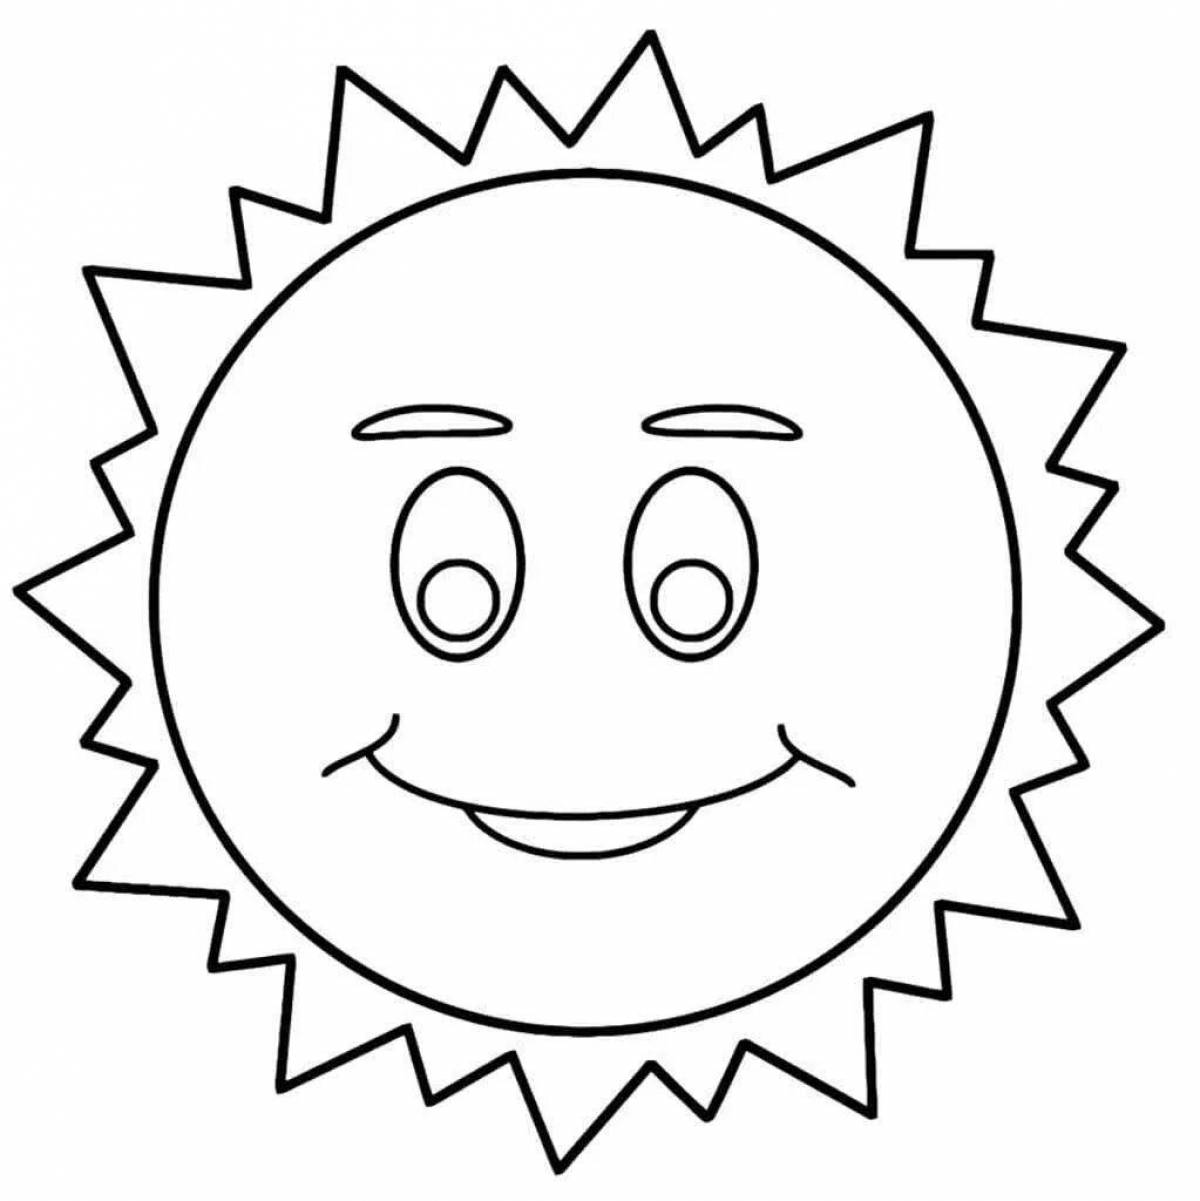 Playful sun coloring book for 3-4 year olds